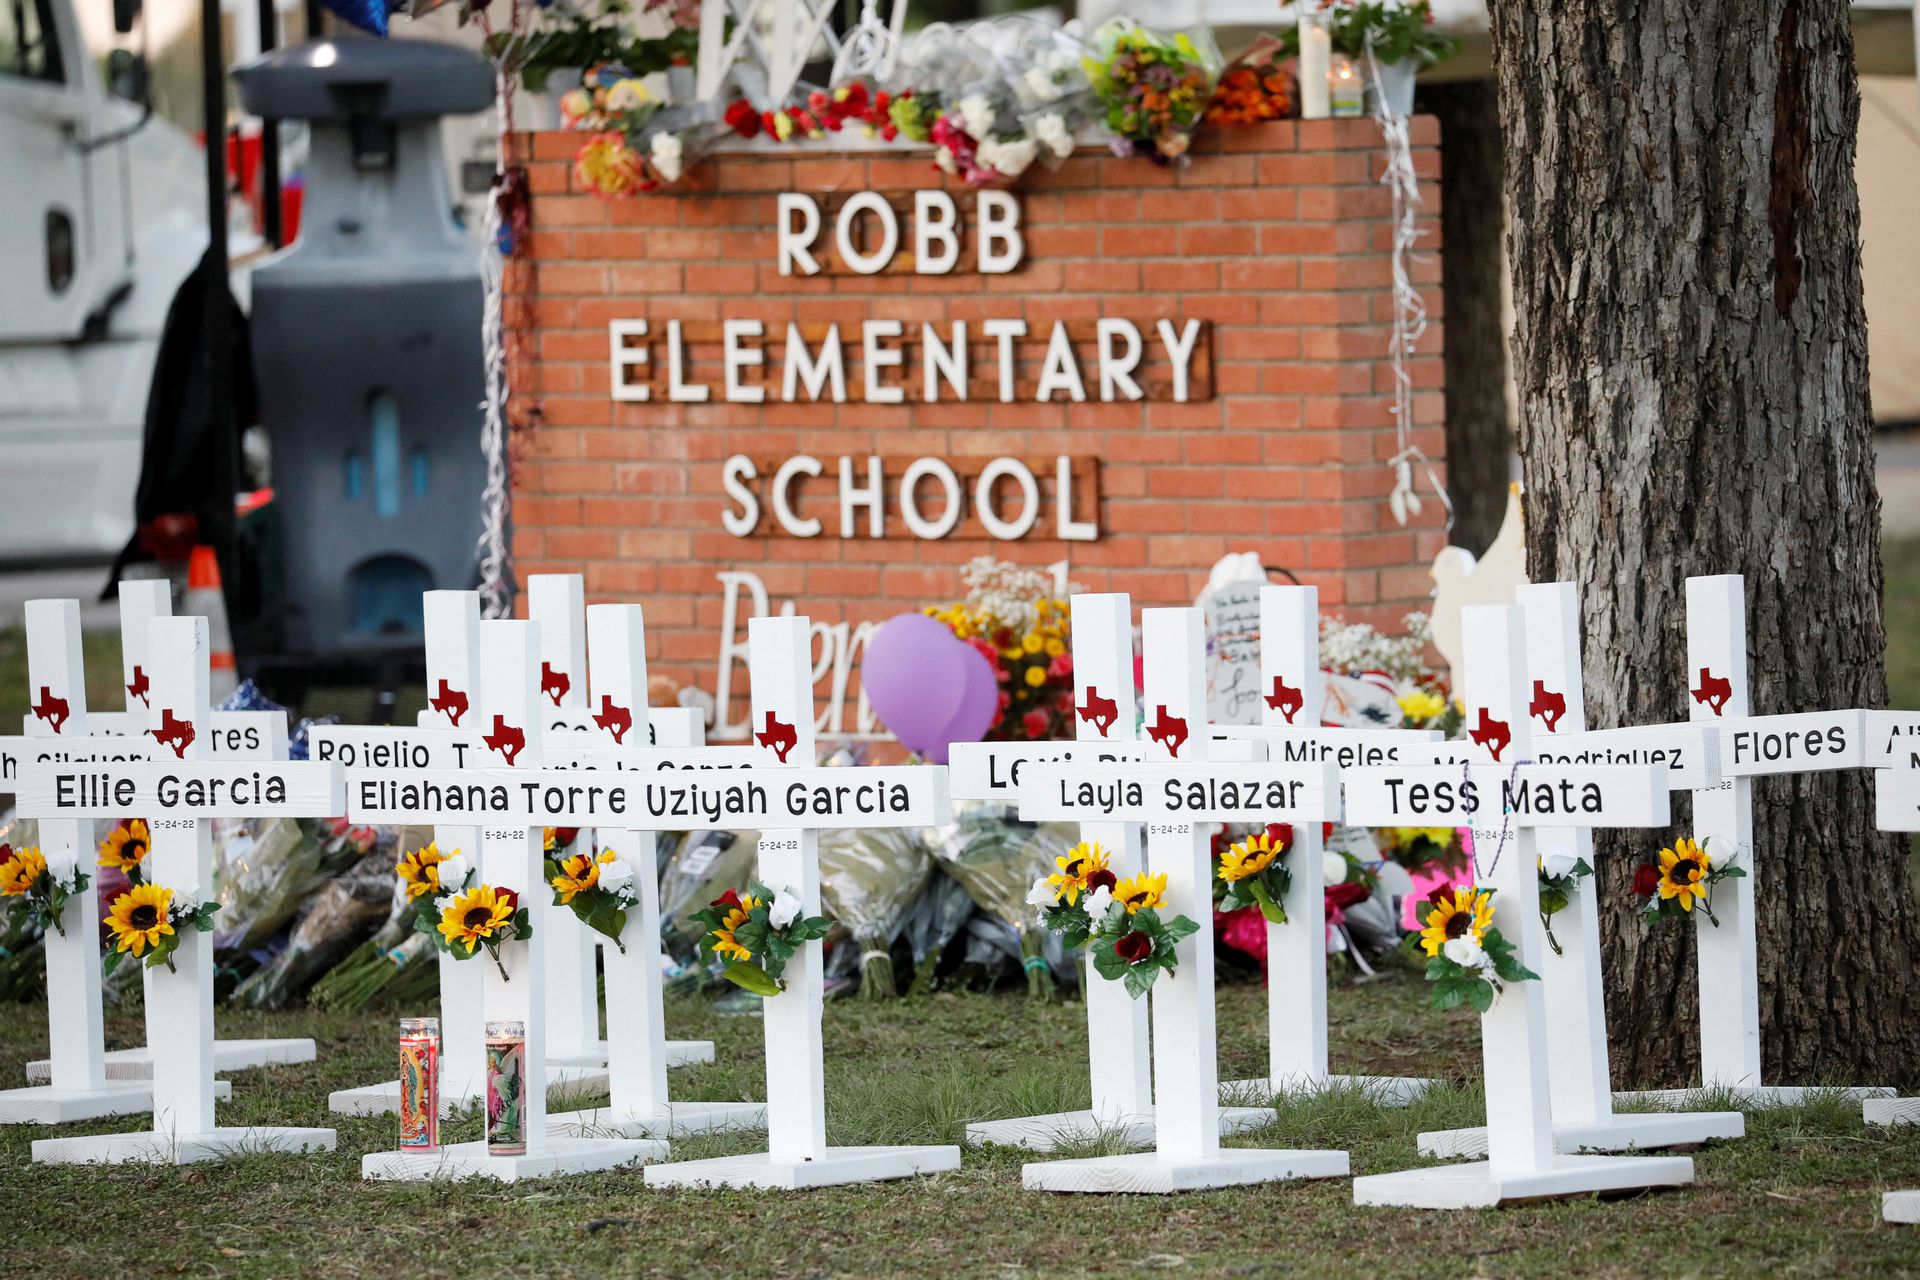 Americans in Singapore Reflect on the Texas School Shooting Tragedy